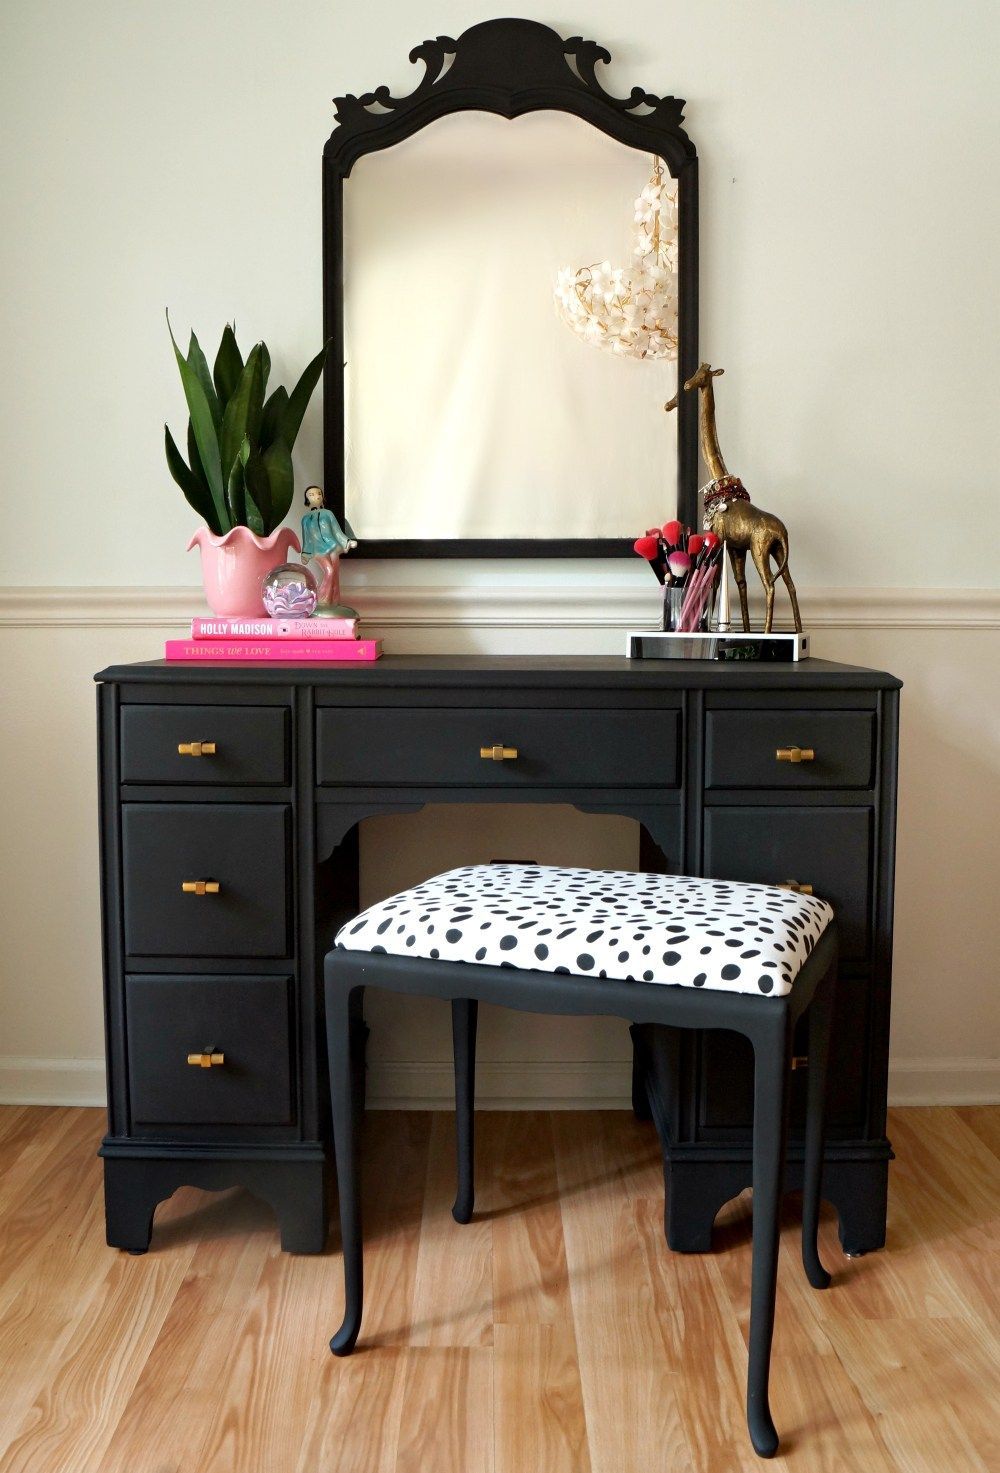 black and gold vanity set with polkadot seat – so cute!